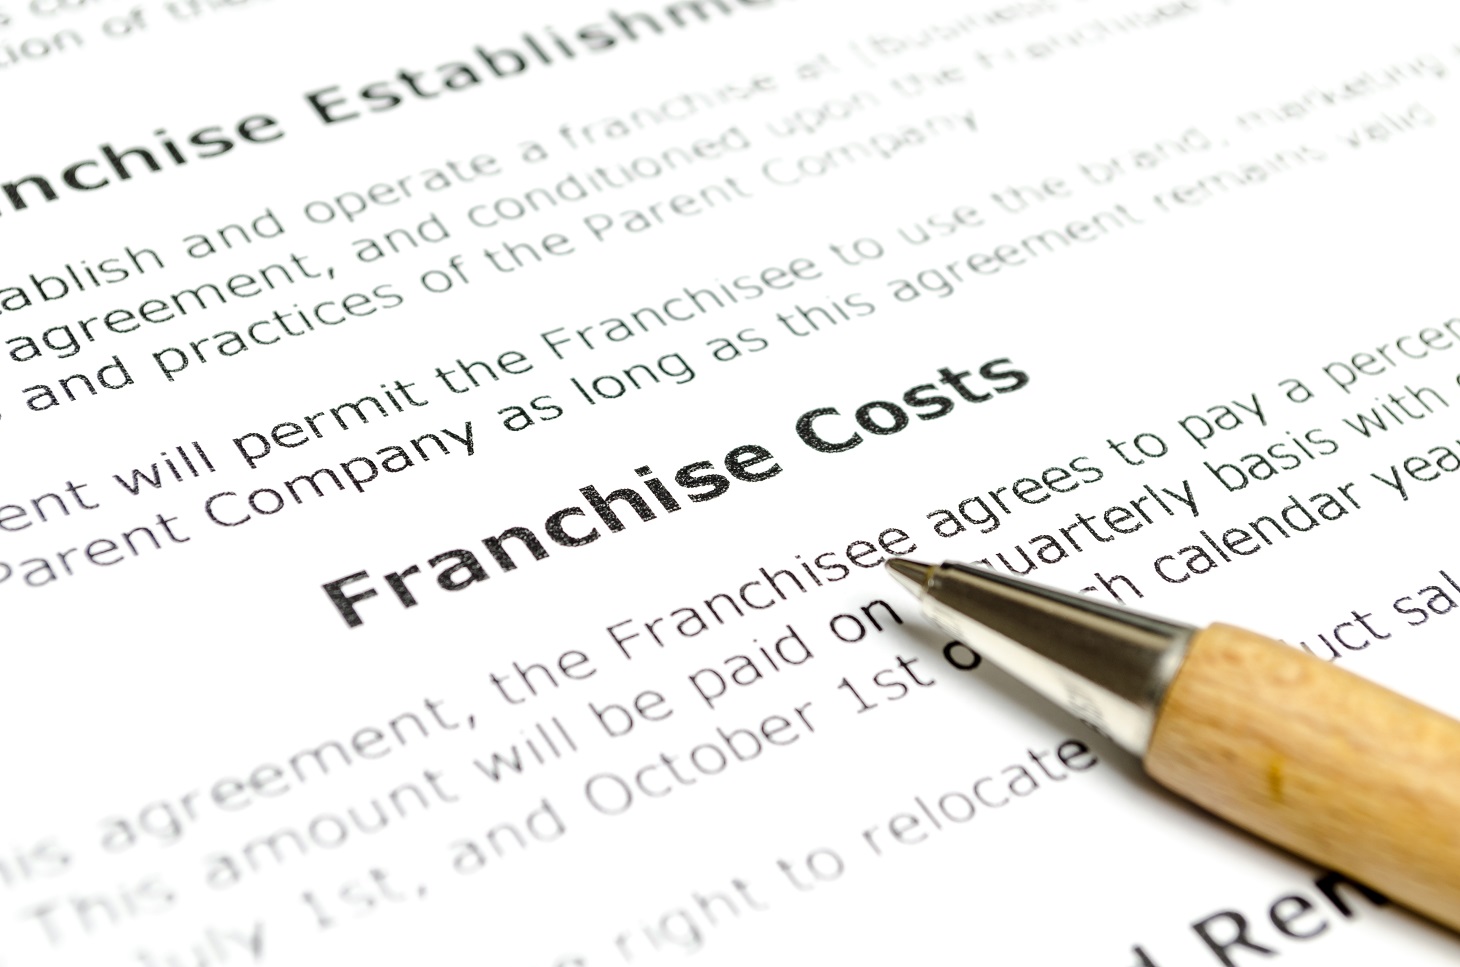 Structure of the Franchise Disclosure Document